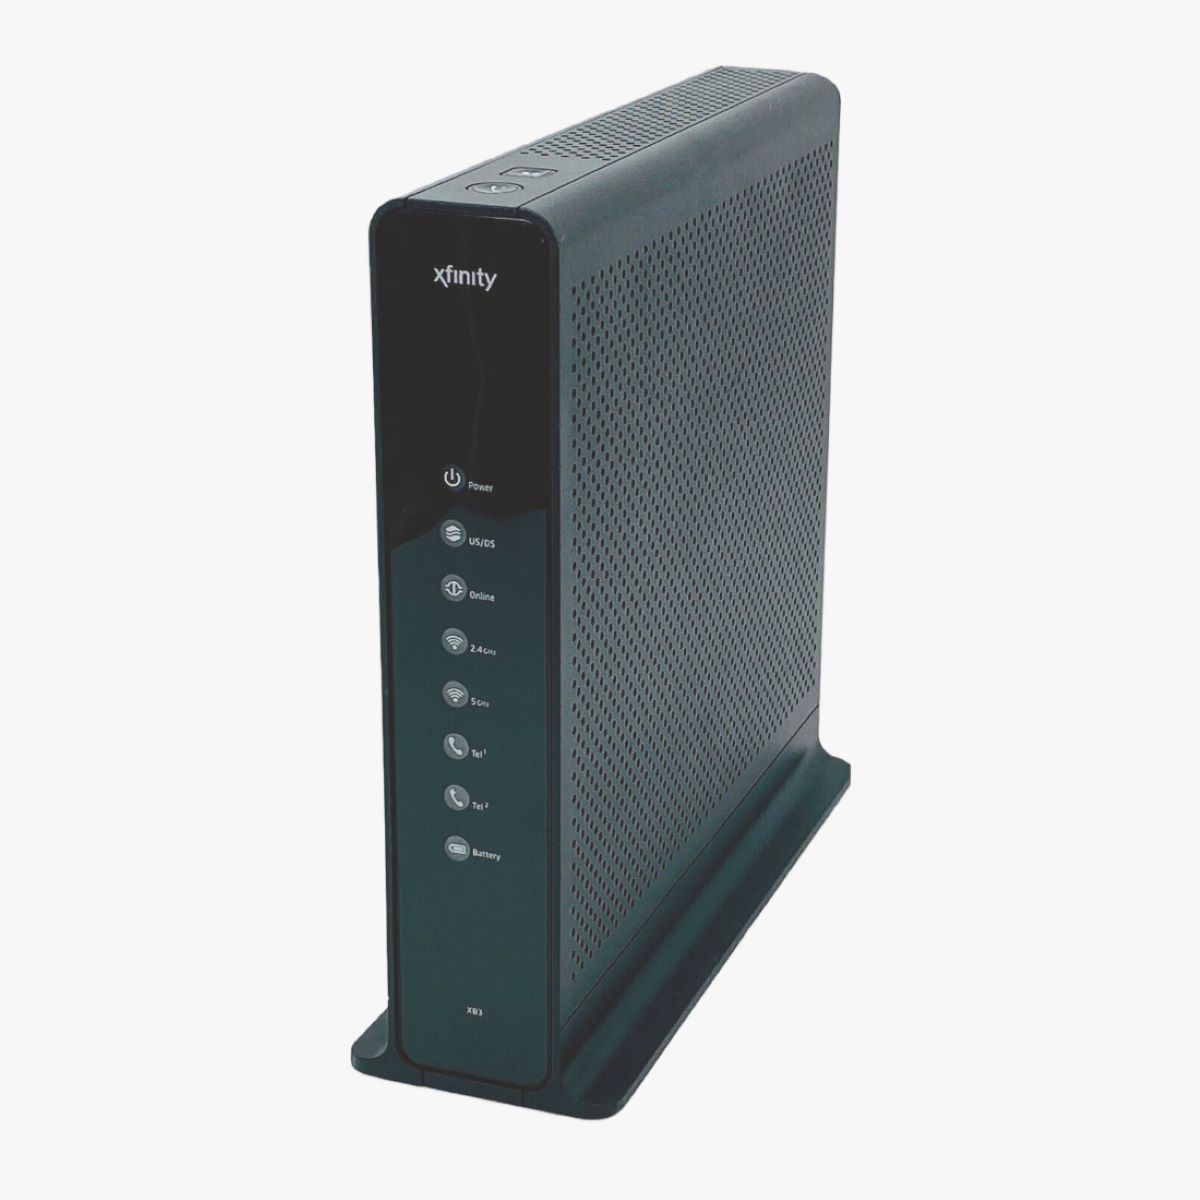 14 Best Cable Modem With WiFi Router Xfinity for 2023